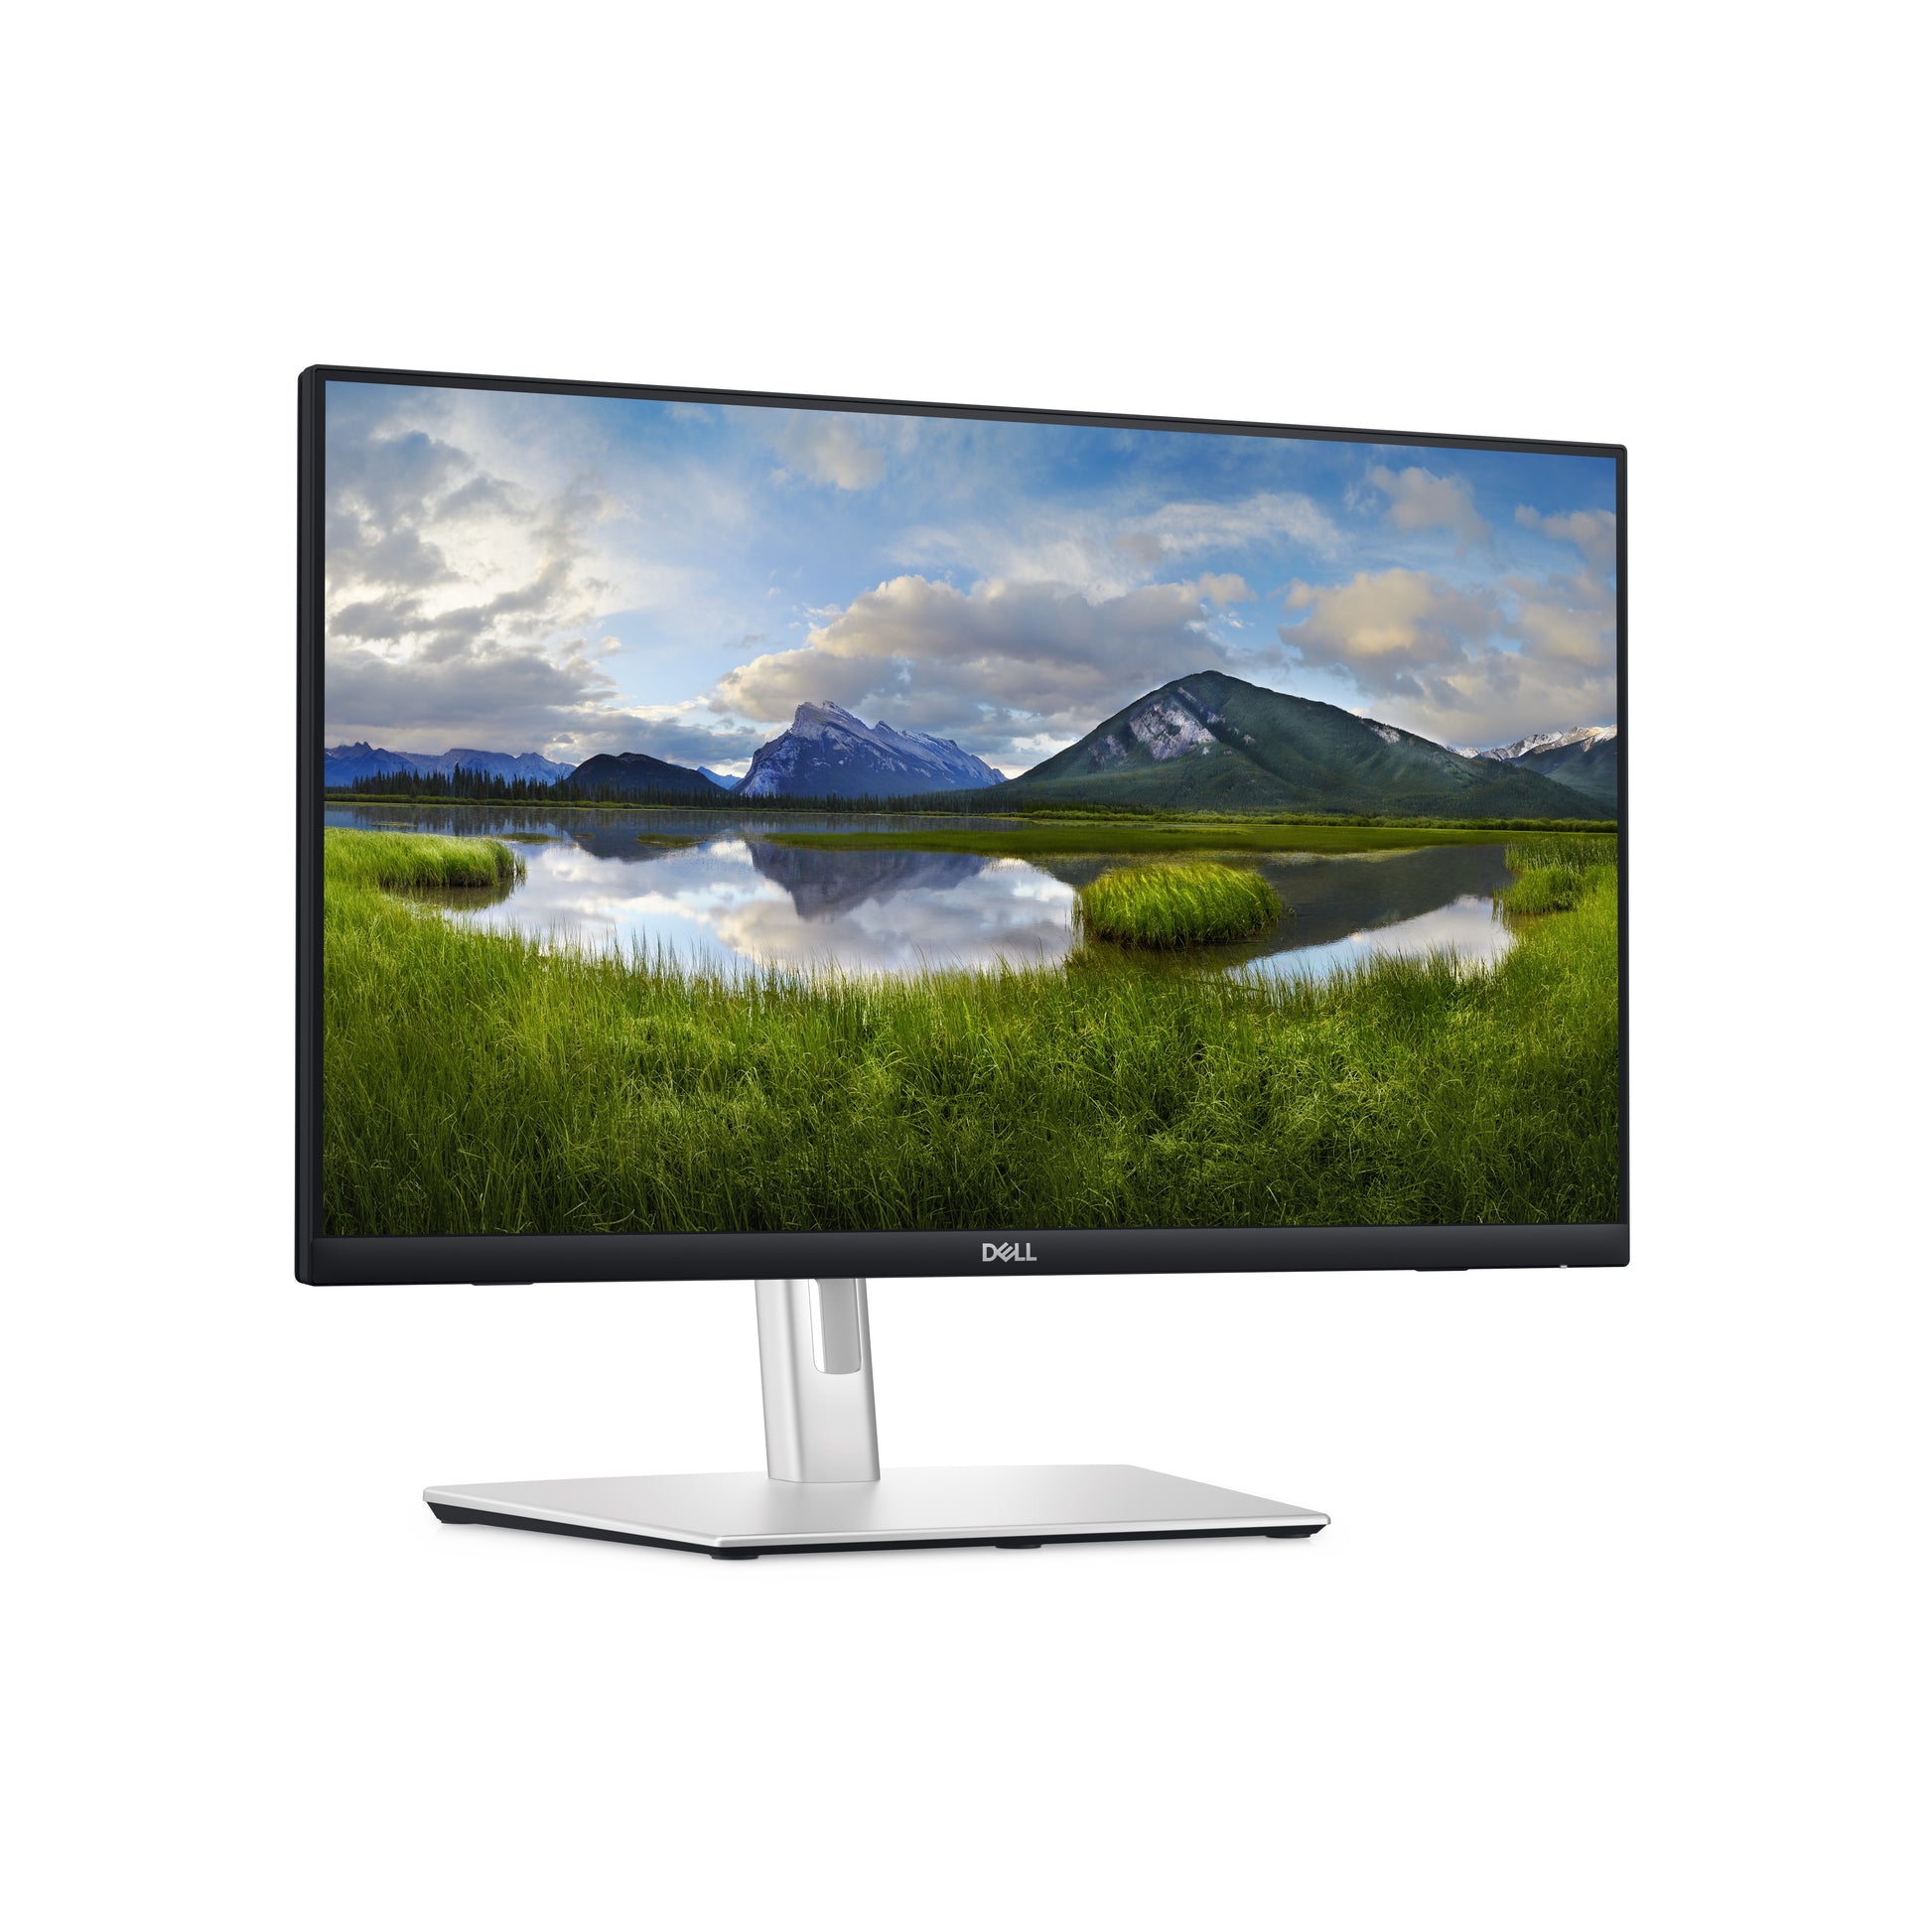 DELL P Series P2424HT computer monitor 60.5 cm (23.8") 1920 x 1080 pixels Full HD LCD Touchscreen Black, Silver-2